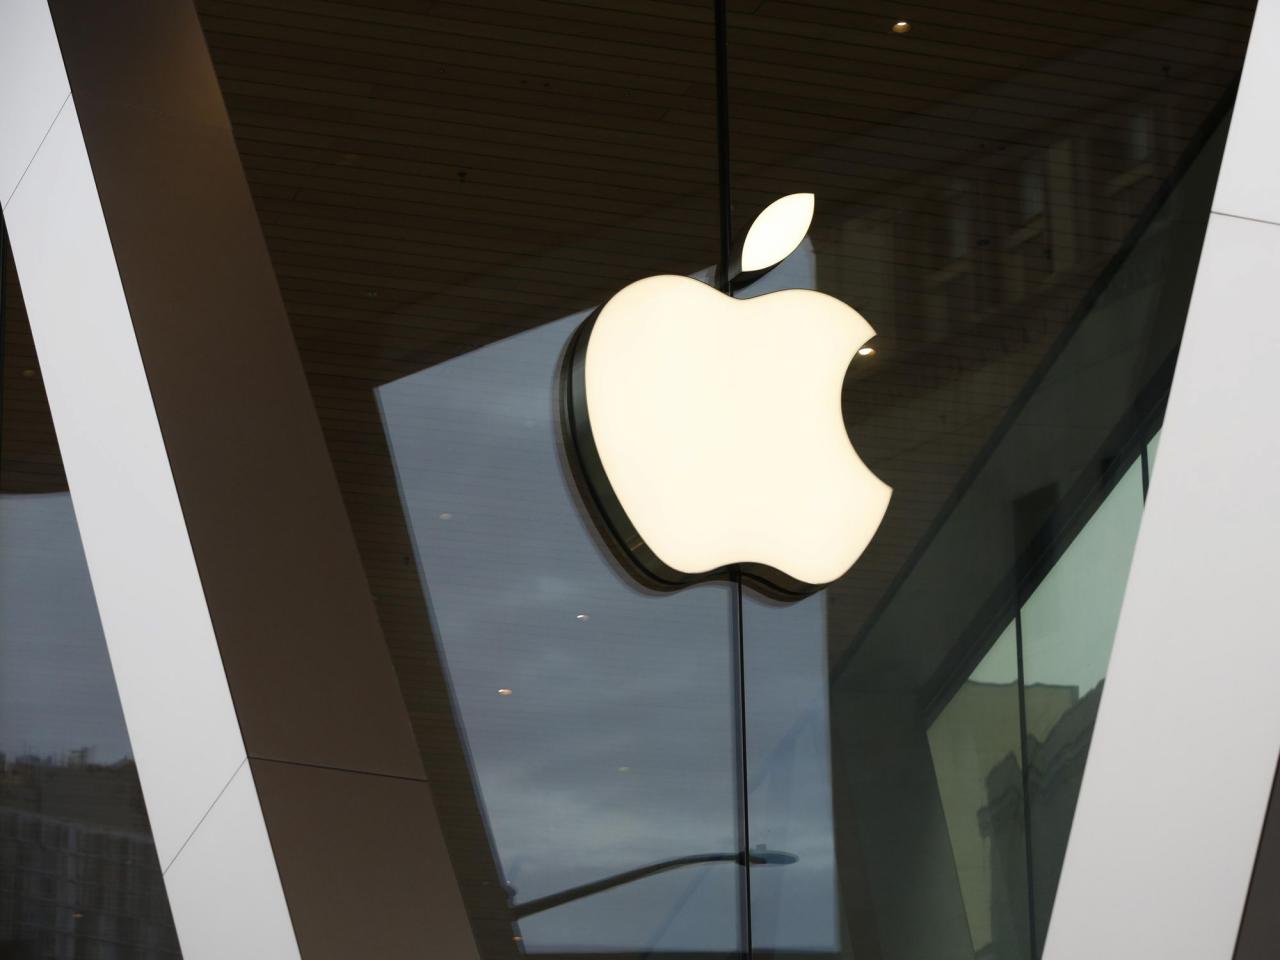 access


European authorities are seeking to interview Apple following its decision to restrict access to the Epic Games app store.